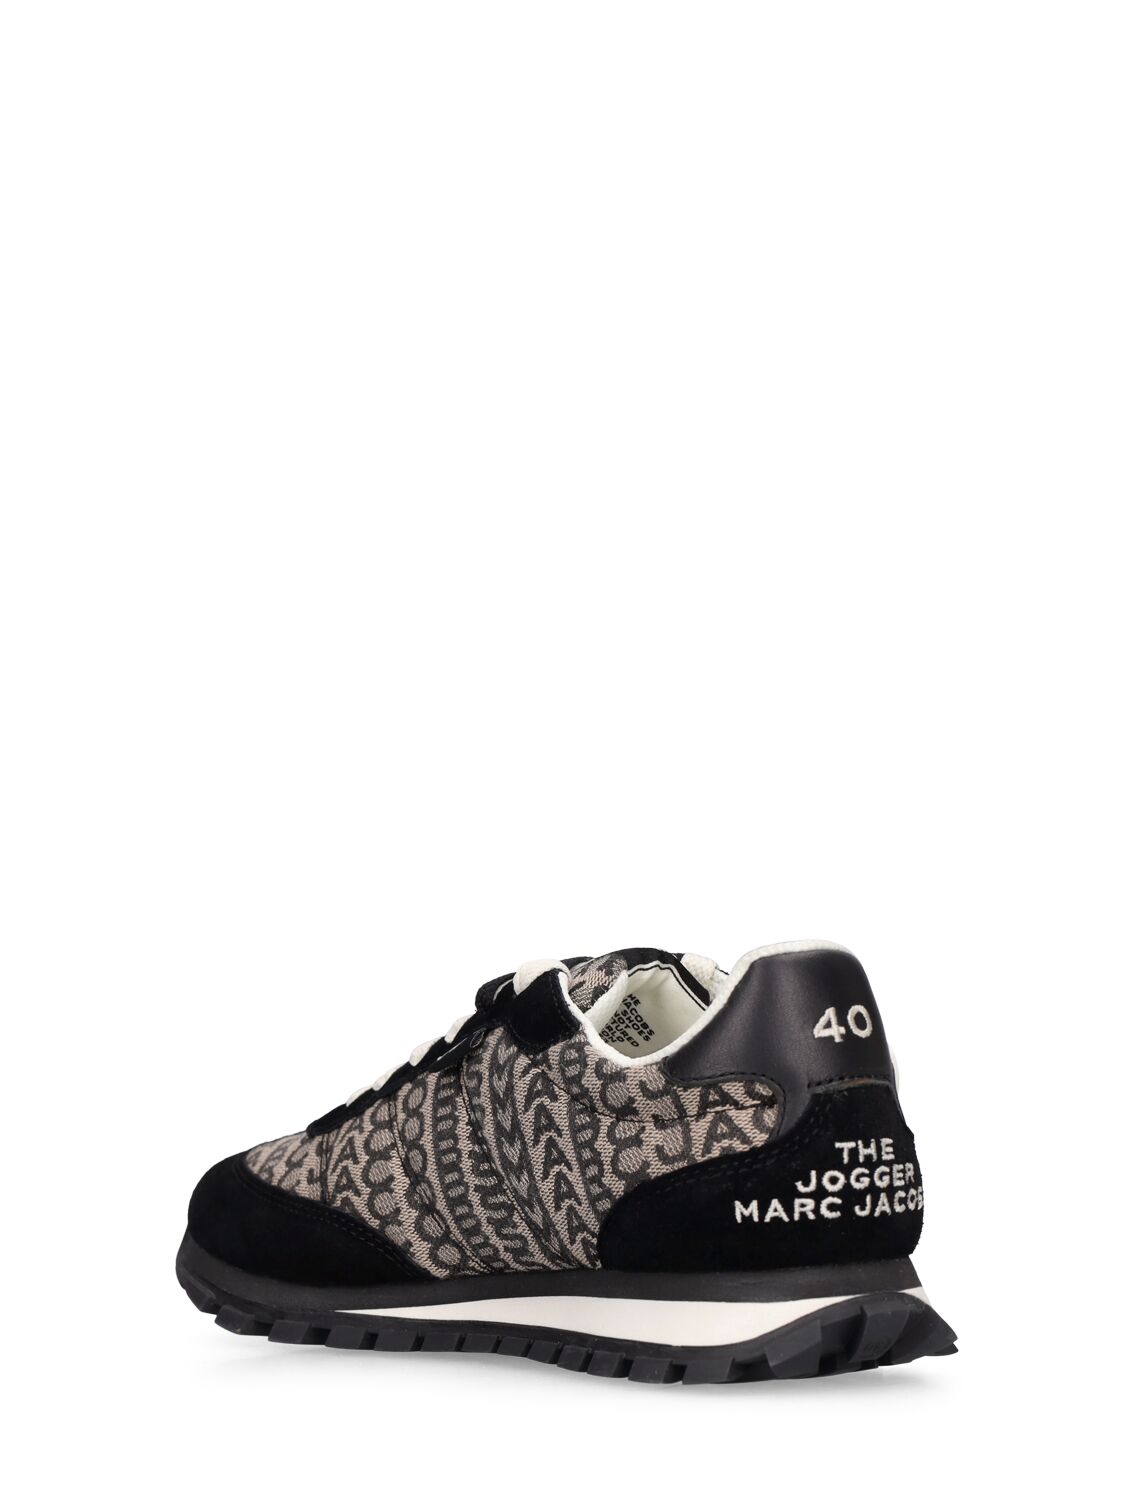 Womens Shoes Marc Jacobs, Style code: m9002373-005